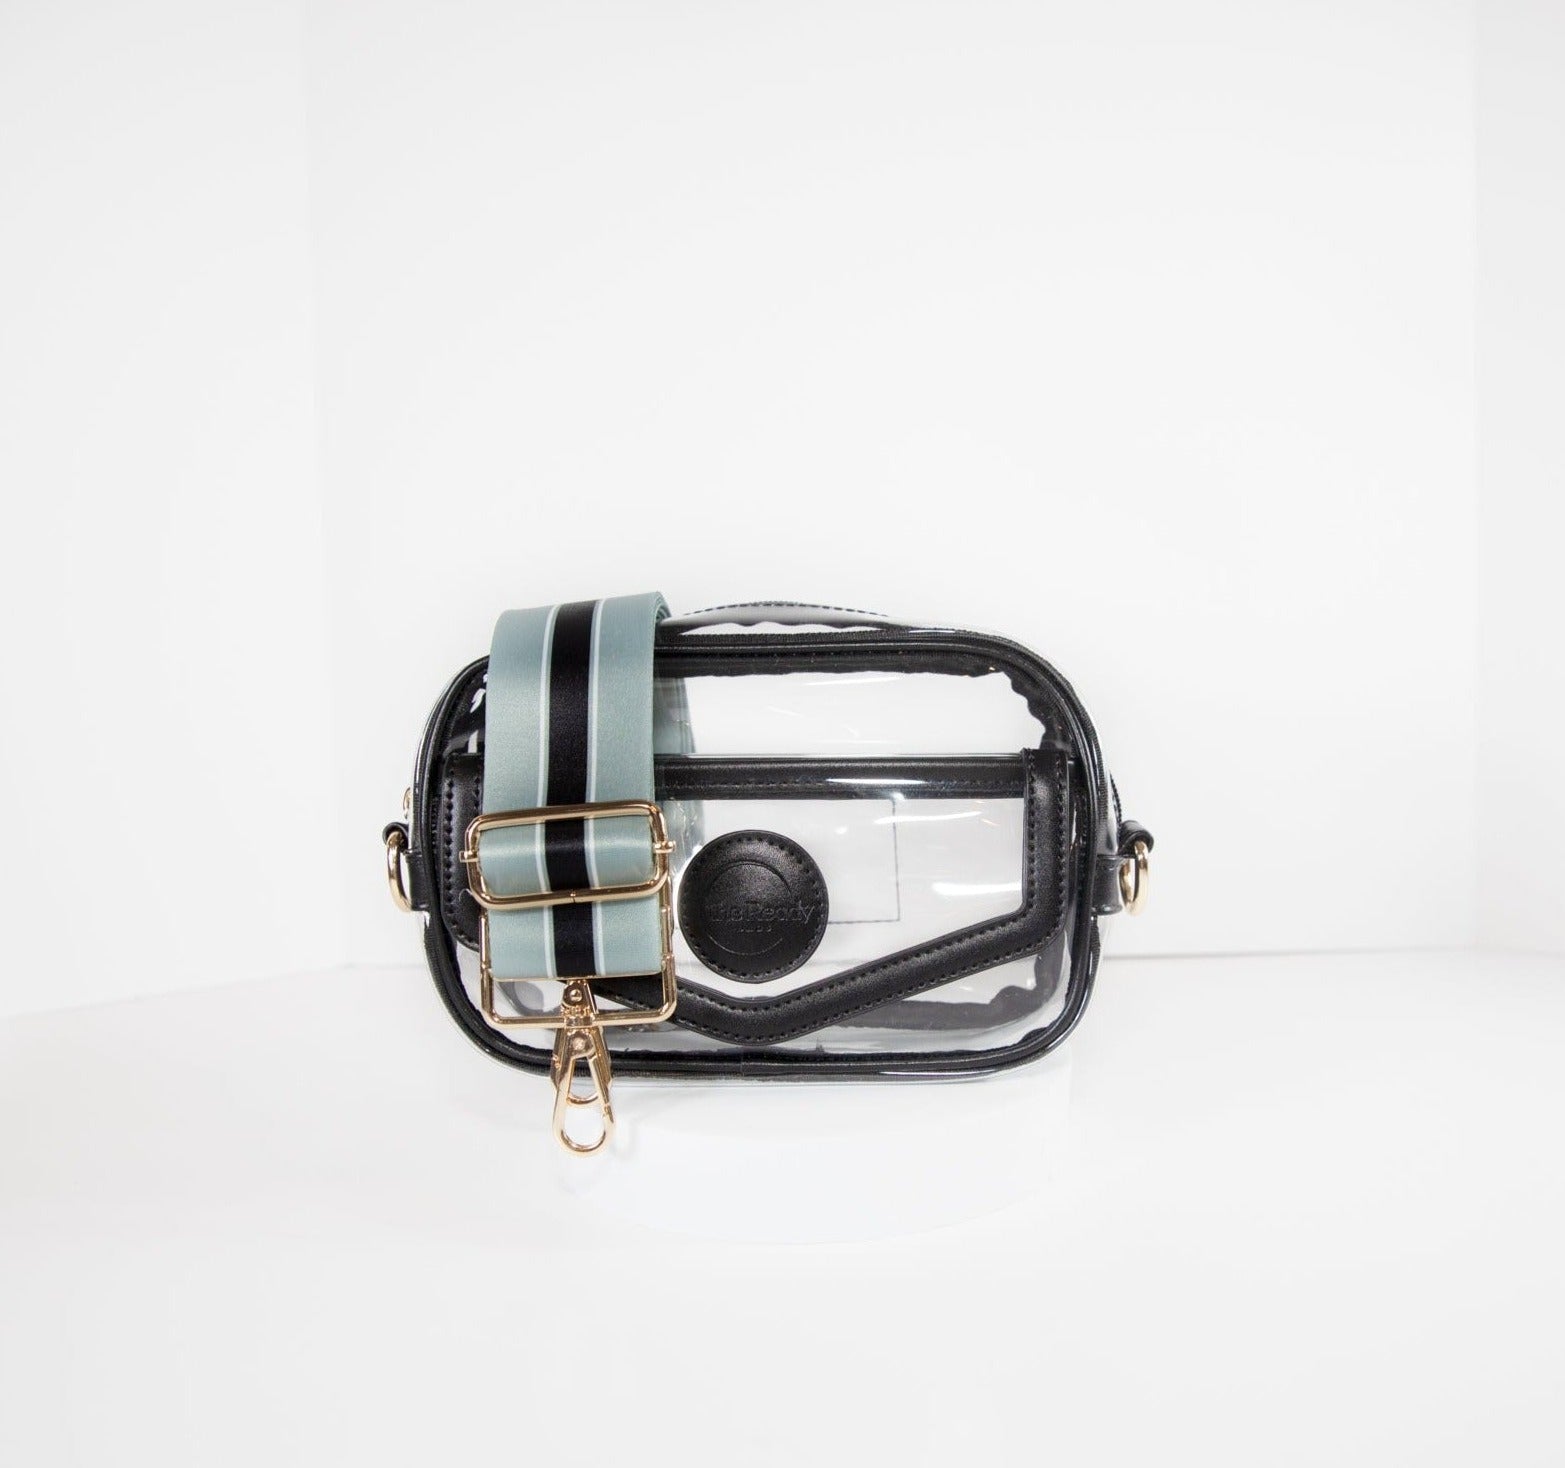 Clear stadium bag with black leather trim, front facing, with a crossbody strap in the Las Vegas Raiders Silver and Black team colors.